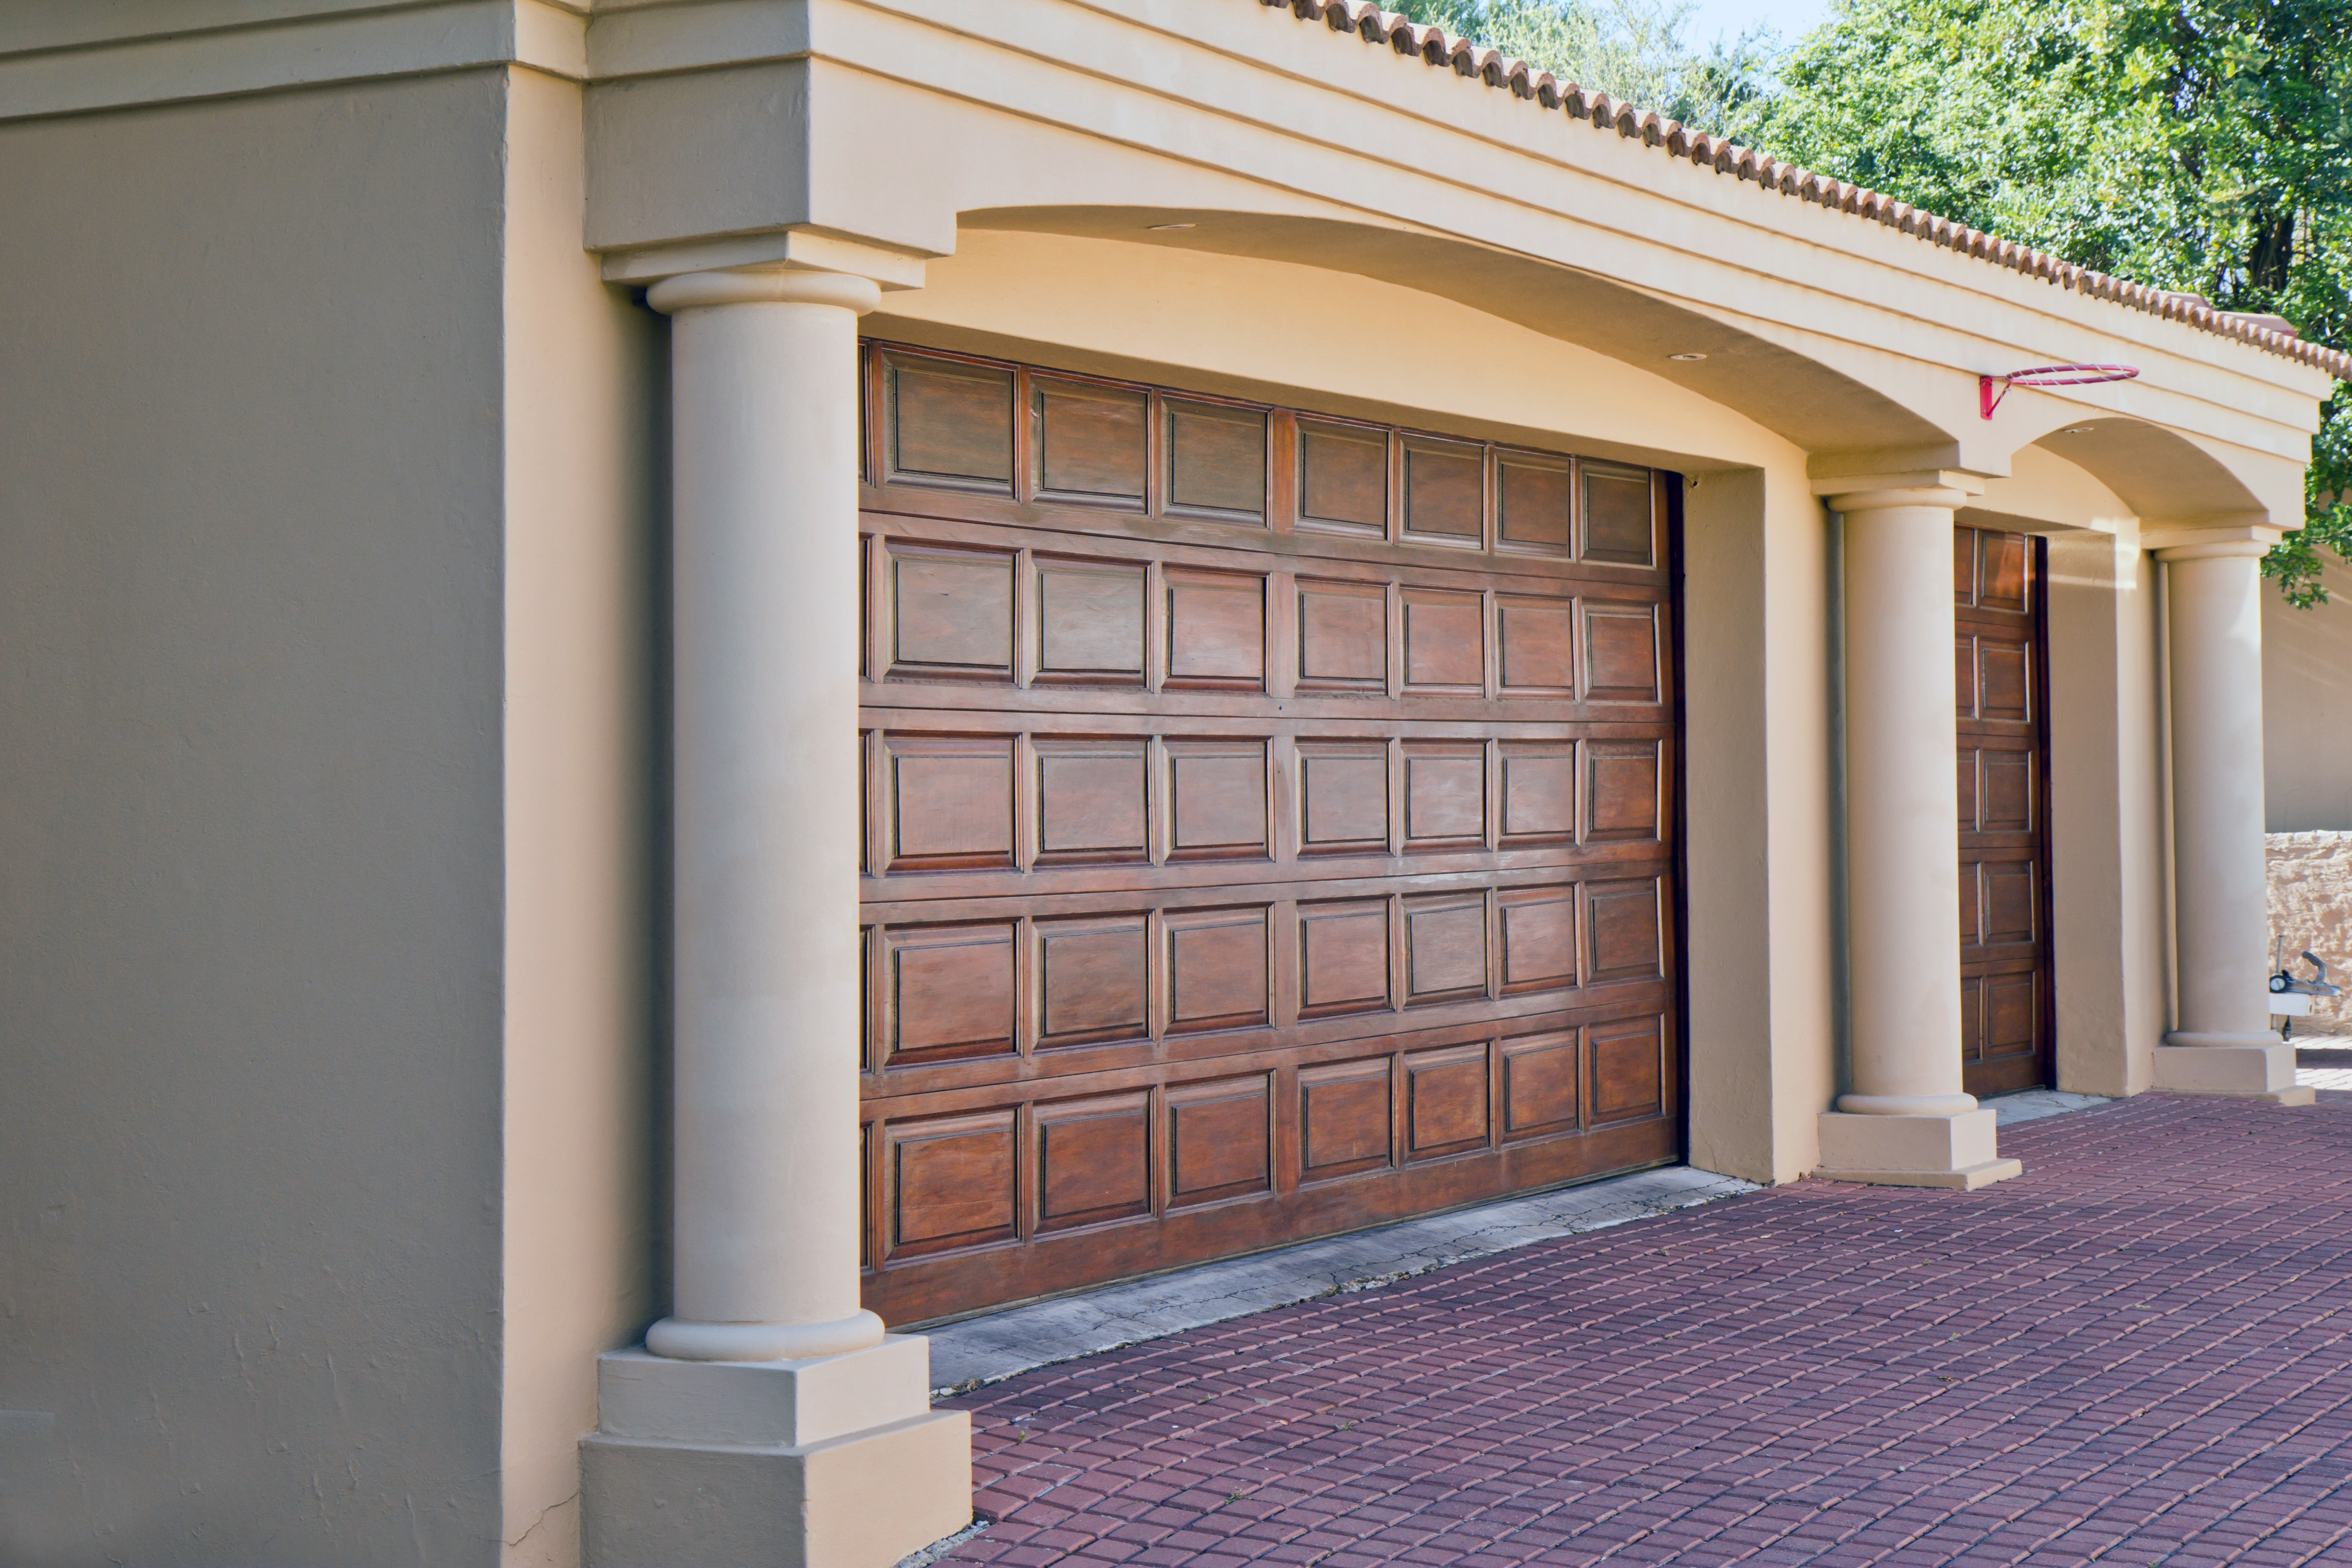 Bowling Green Garage Doors Home in dimensions 5184 X 3456